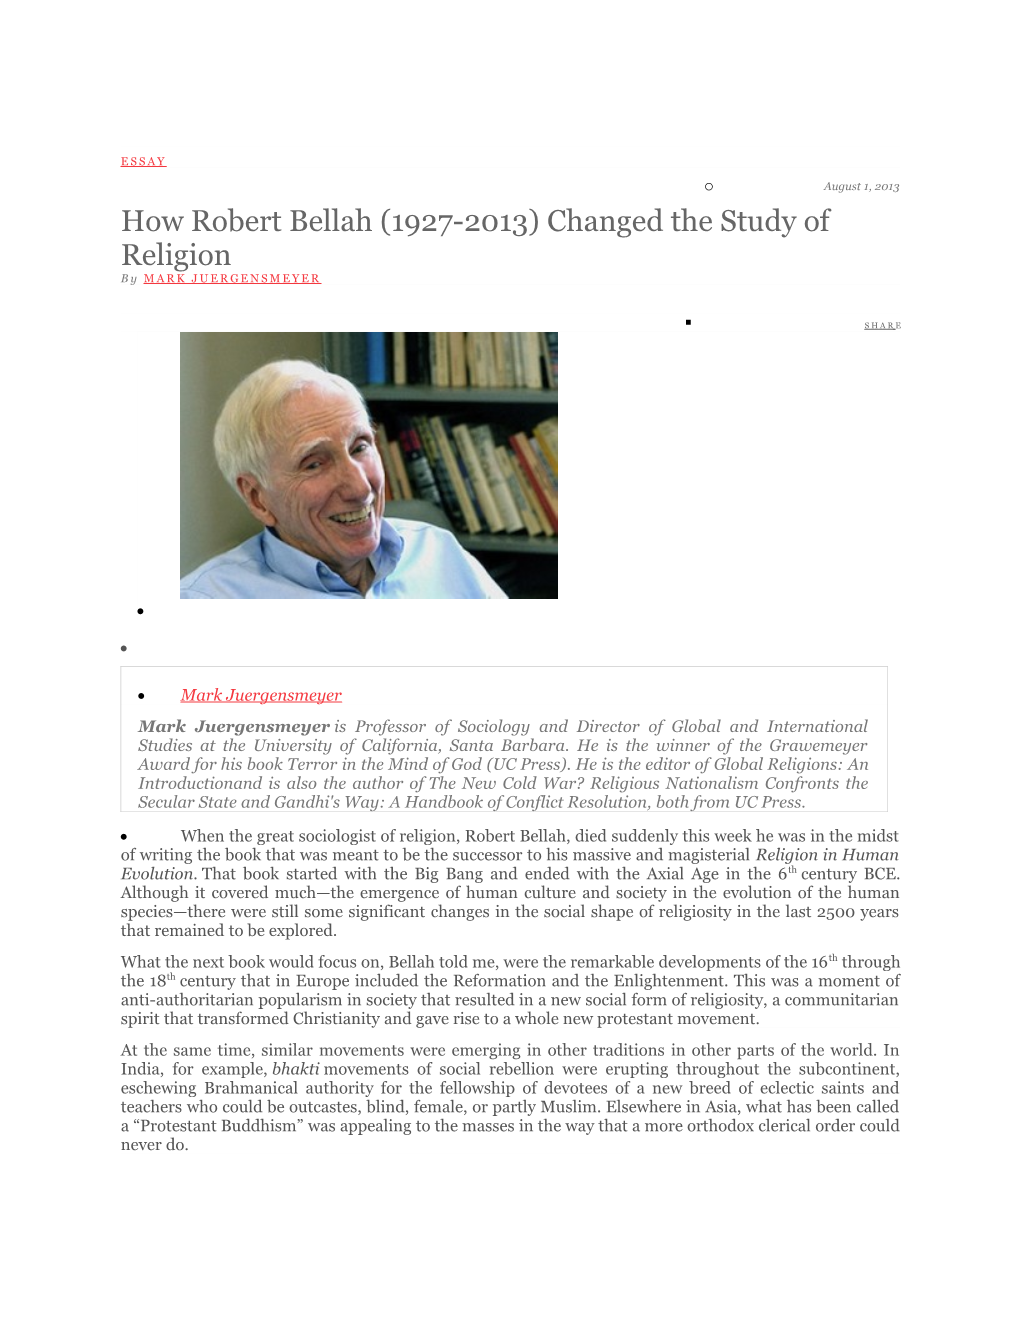 How Robert Bellah (1927-2013) Changed the Study of Religion